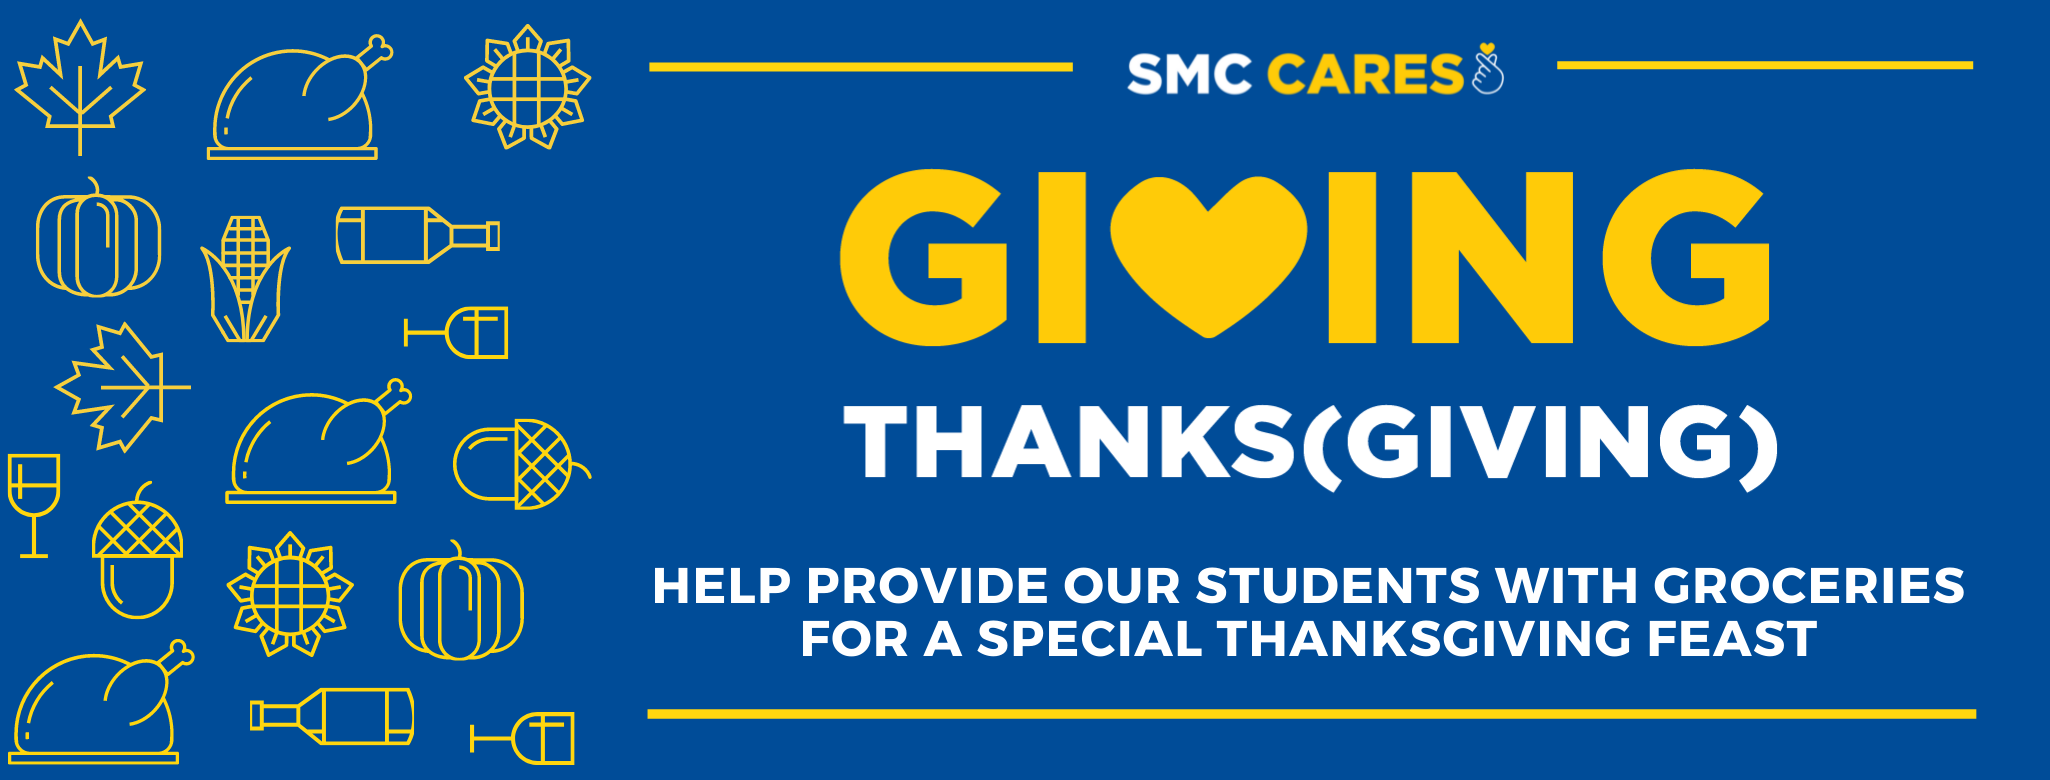 Help Provide Our Students with Groceries for a Special Thanksgiving Feast